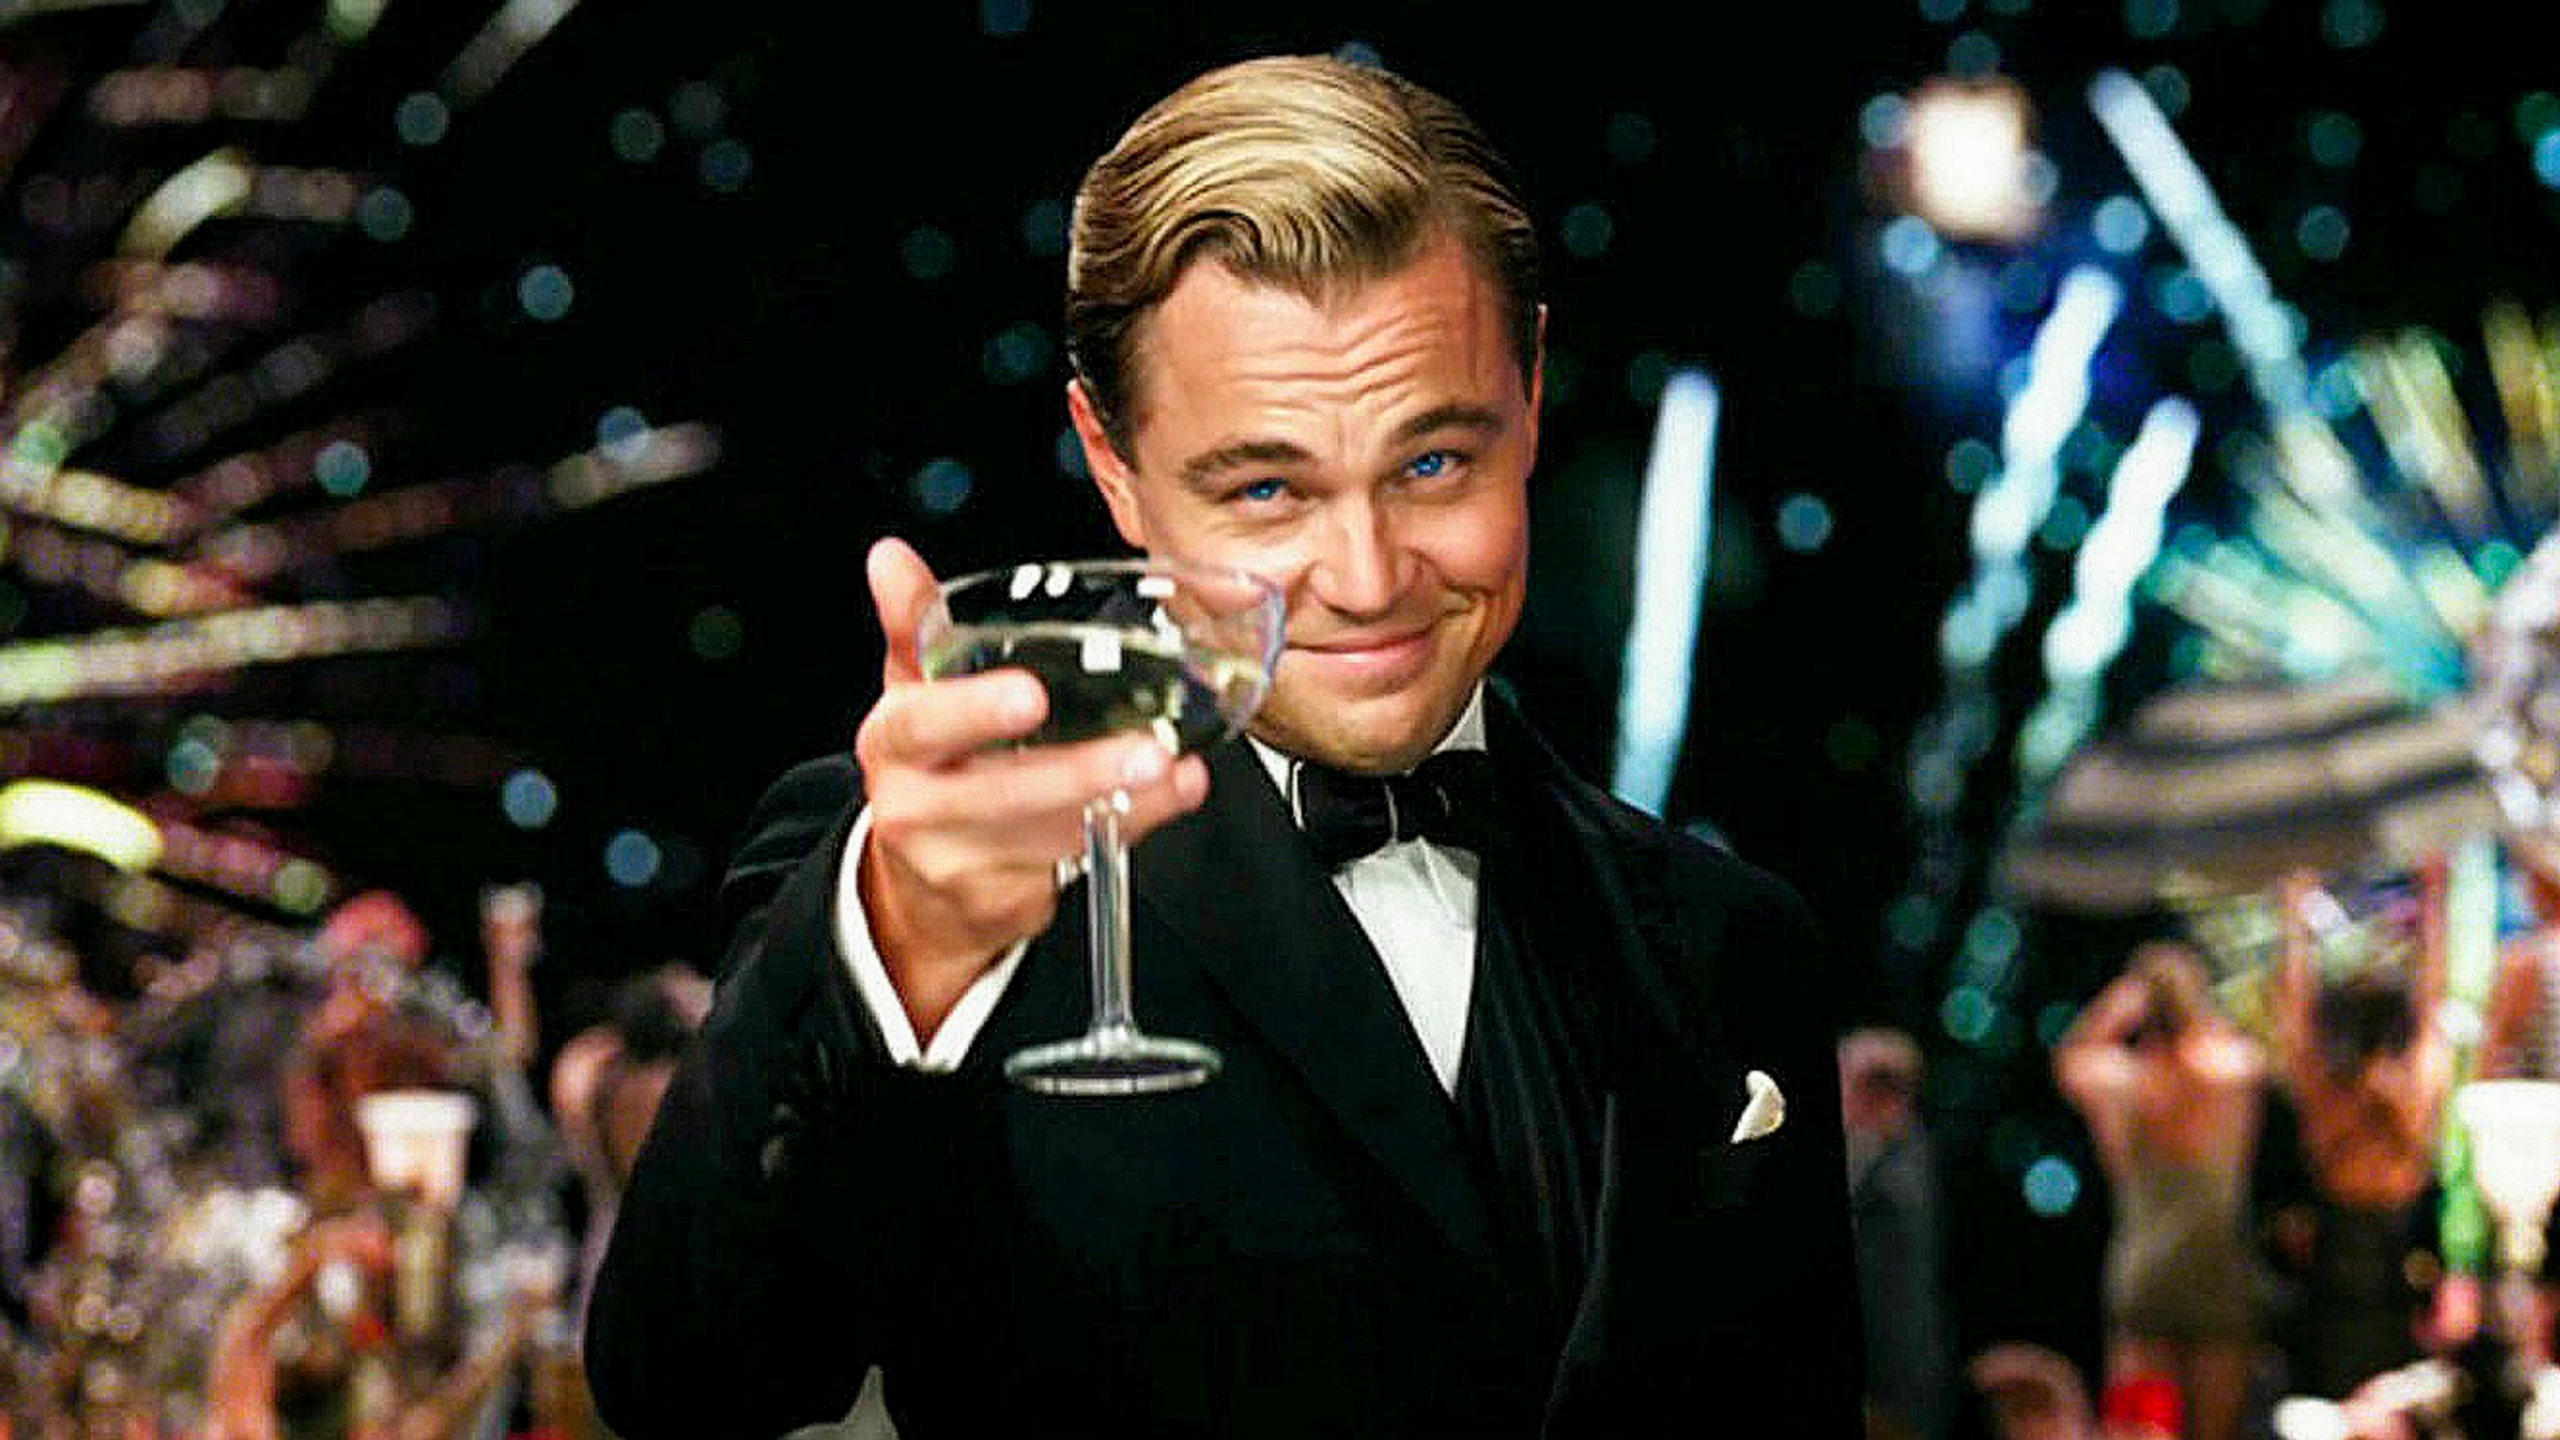 Leo Decaprio Toasting Cheers Salute with a Glass of Champagne 4K Blank Meme Template